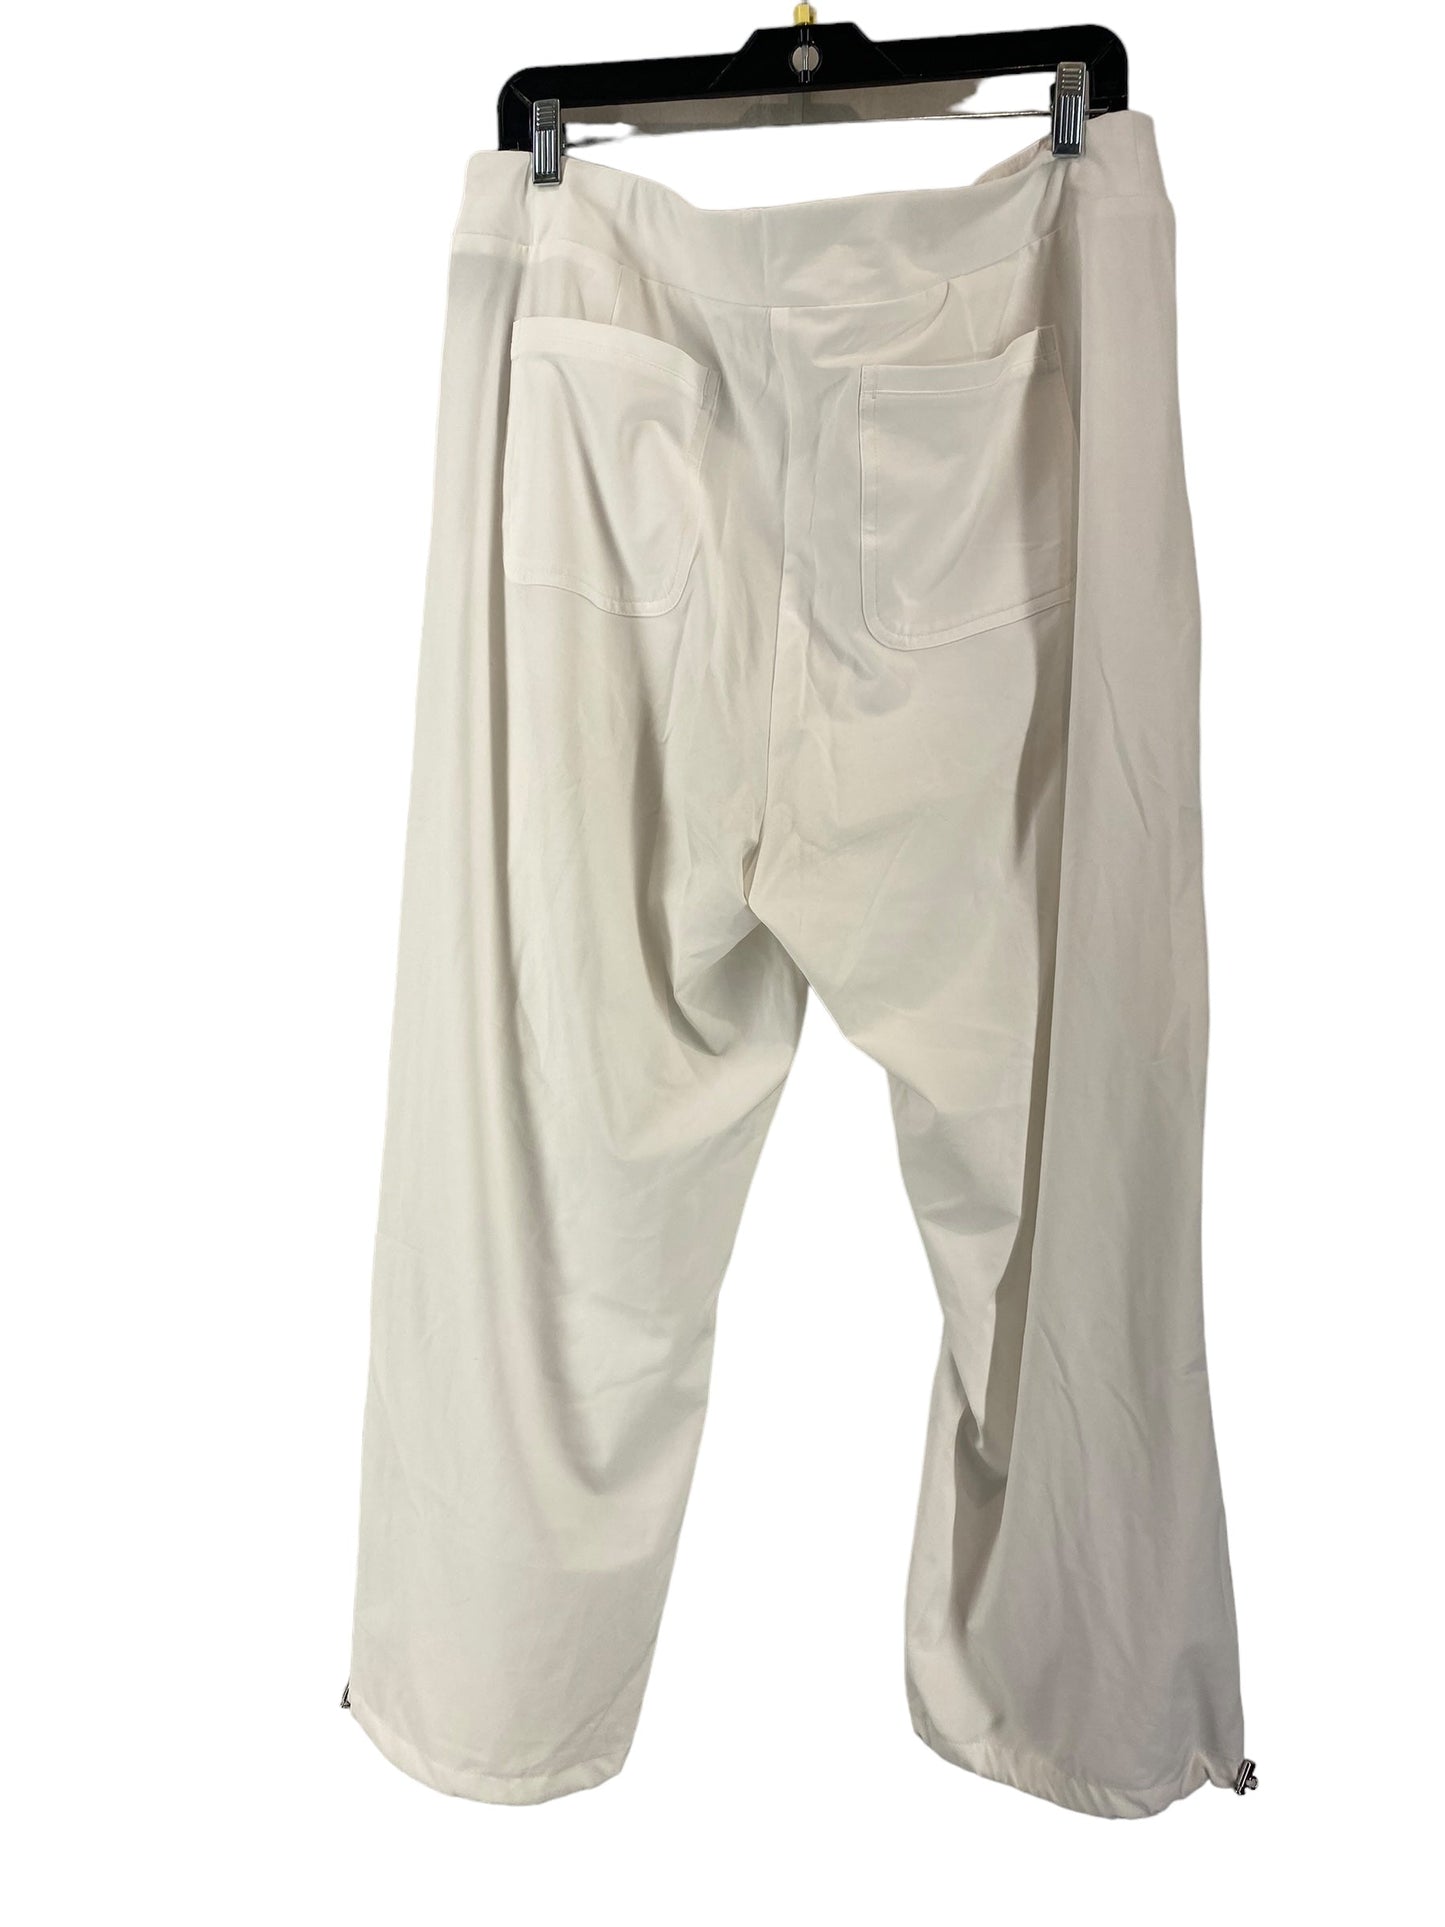 White Pants Other Chicos, Size 2.5